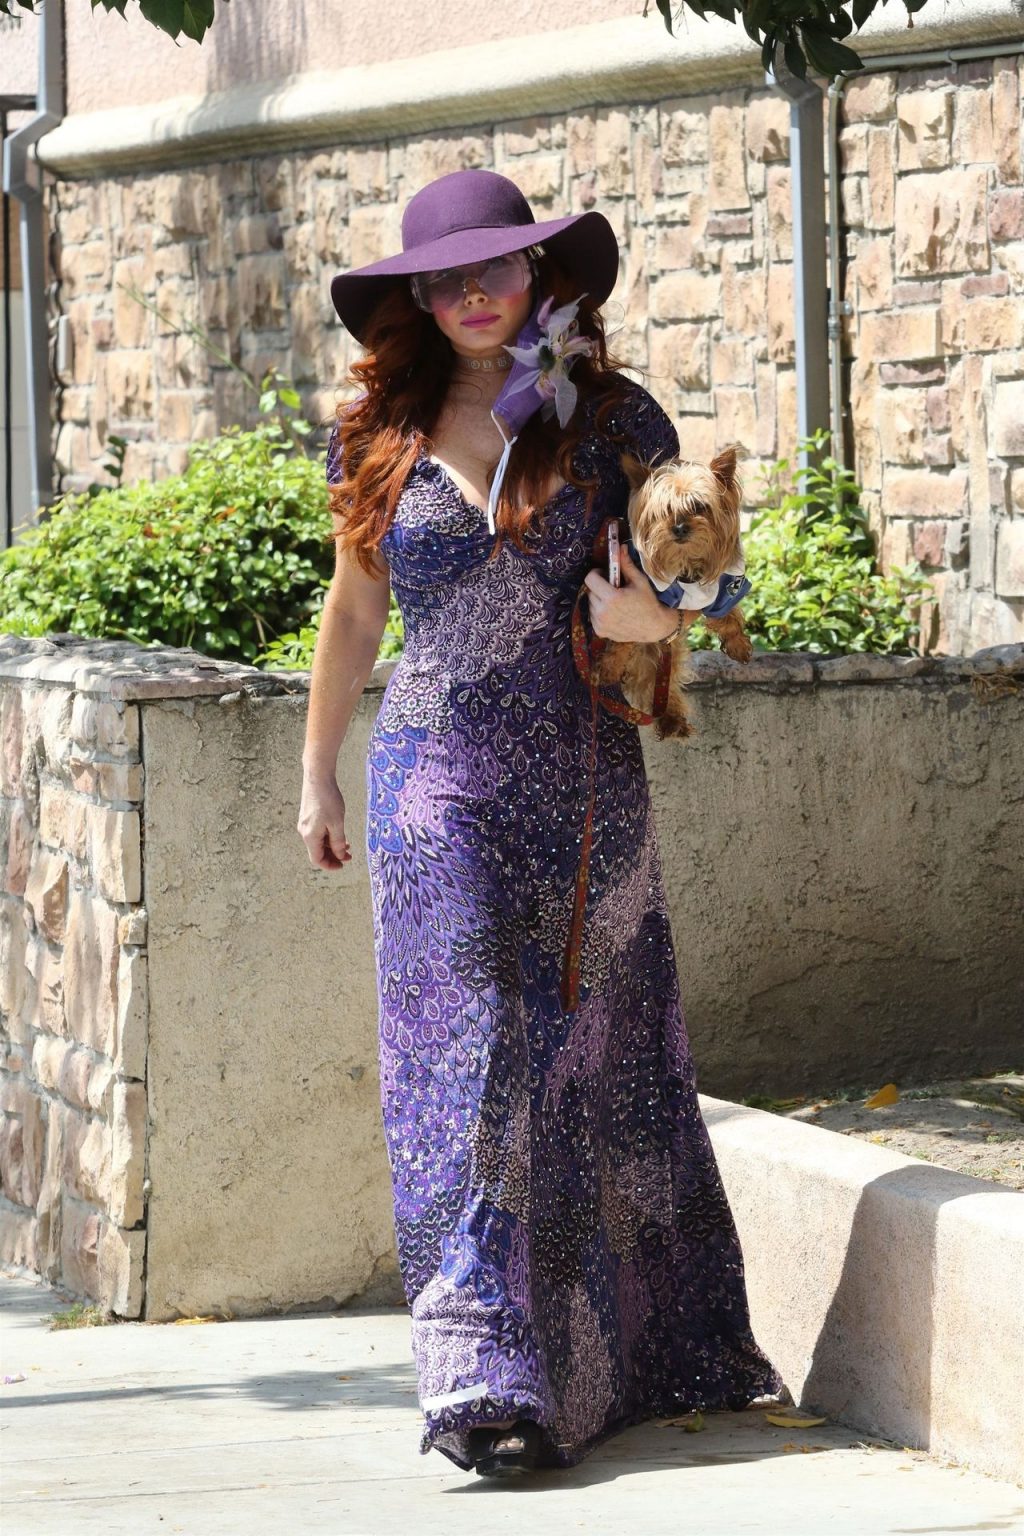 Phoebe Prices Struts Her Stuff in a Purple Dress (42 Photos)